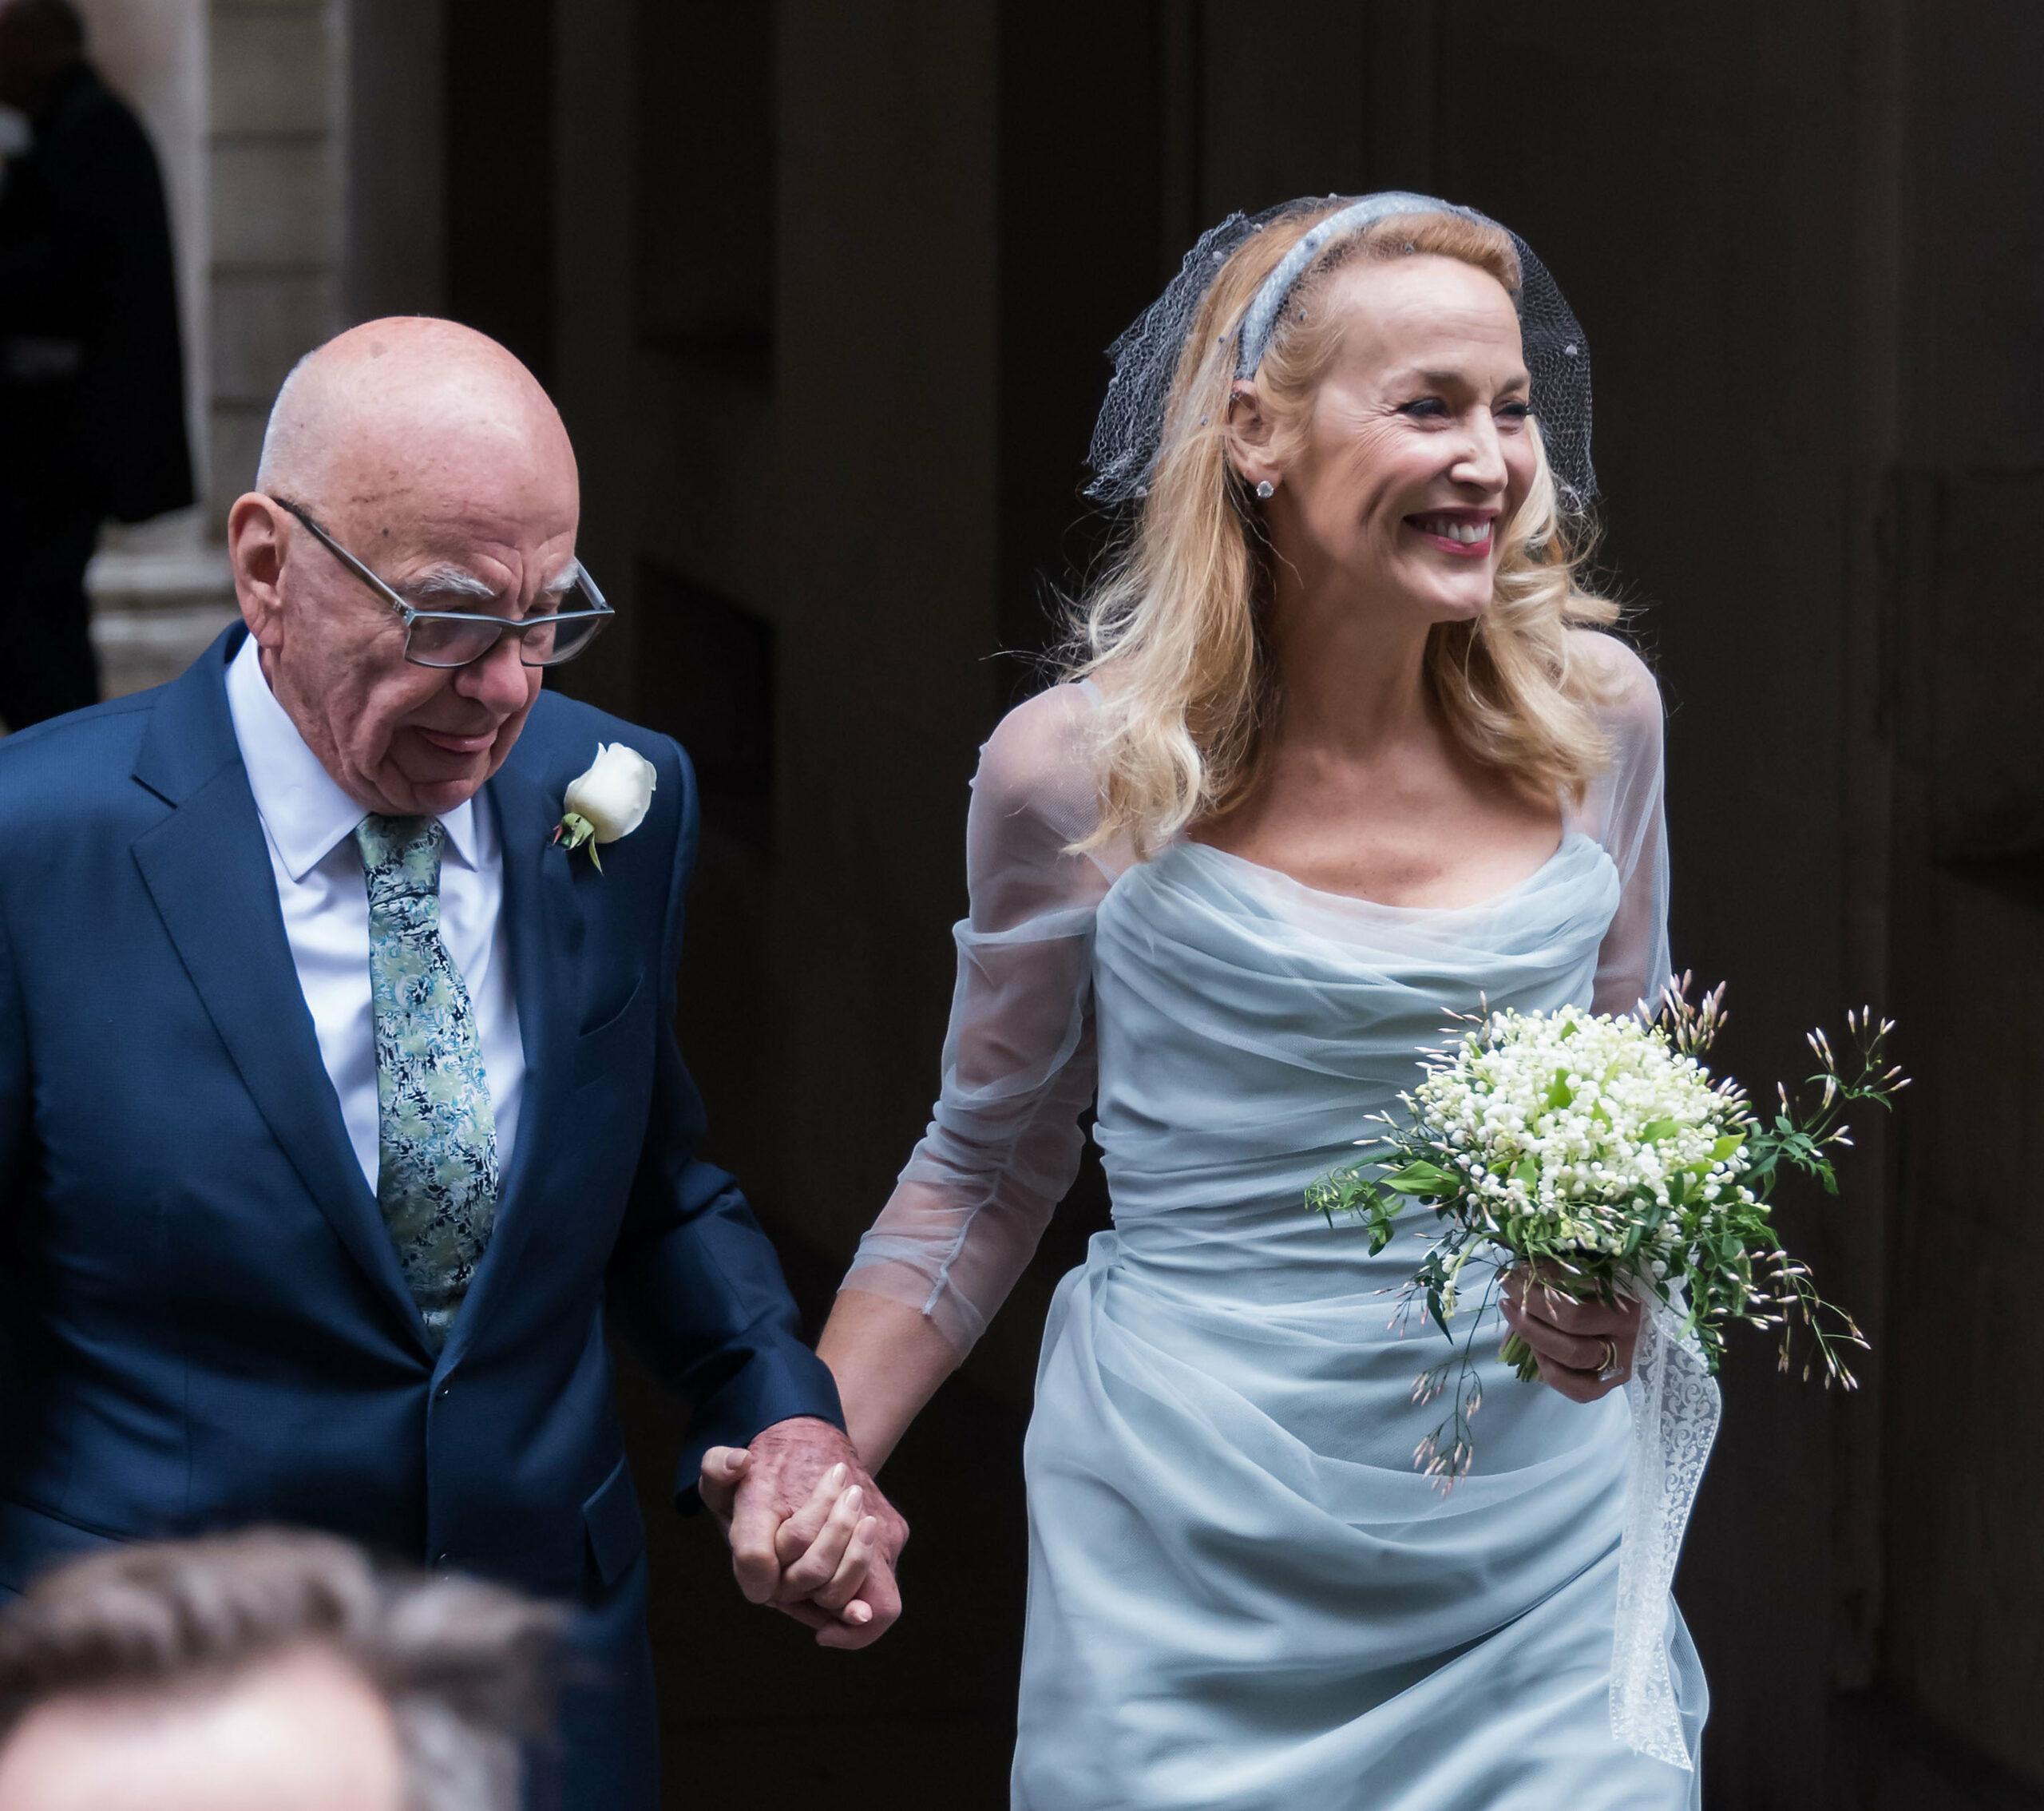 The New York Times Rupert Murdoch and Jerry Hall are said to be divorcing